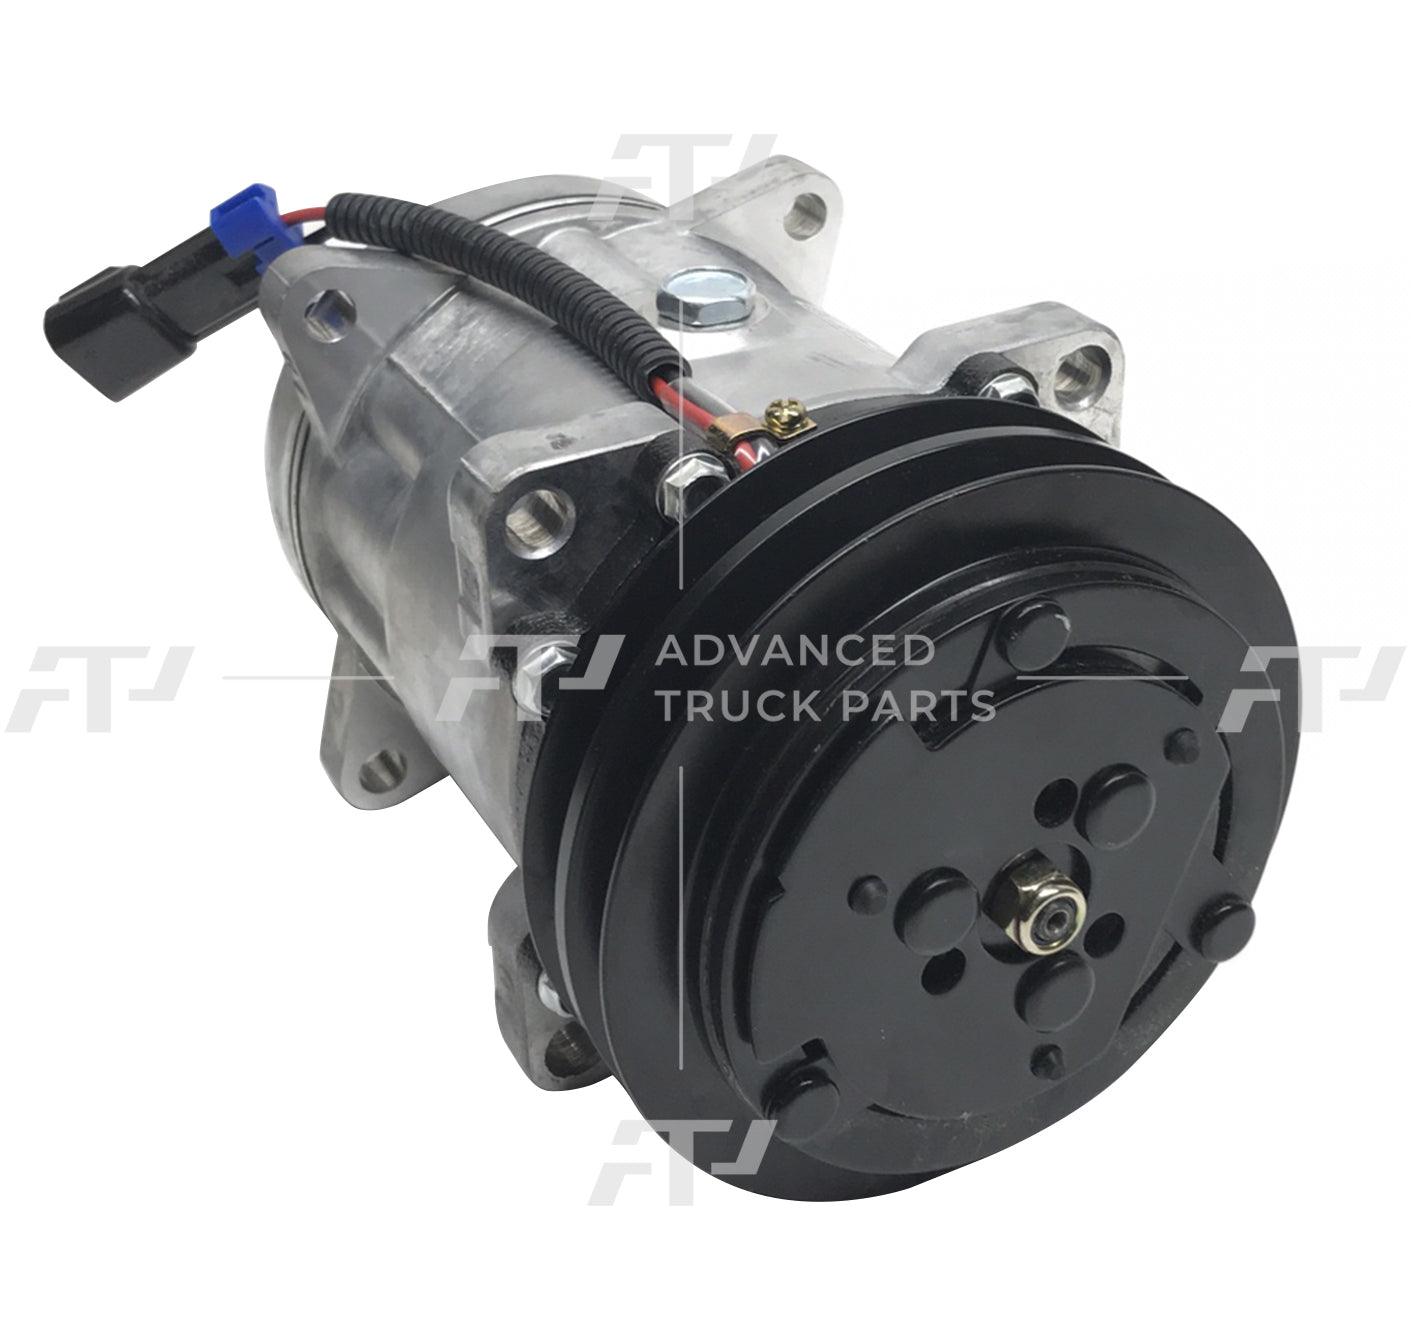 03-3422 Mei® Truck A/C Ac Compressor For Freightliner - ADVANCED TRUCK PARTS